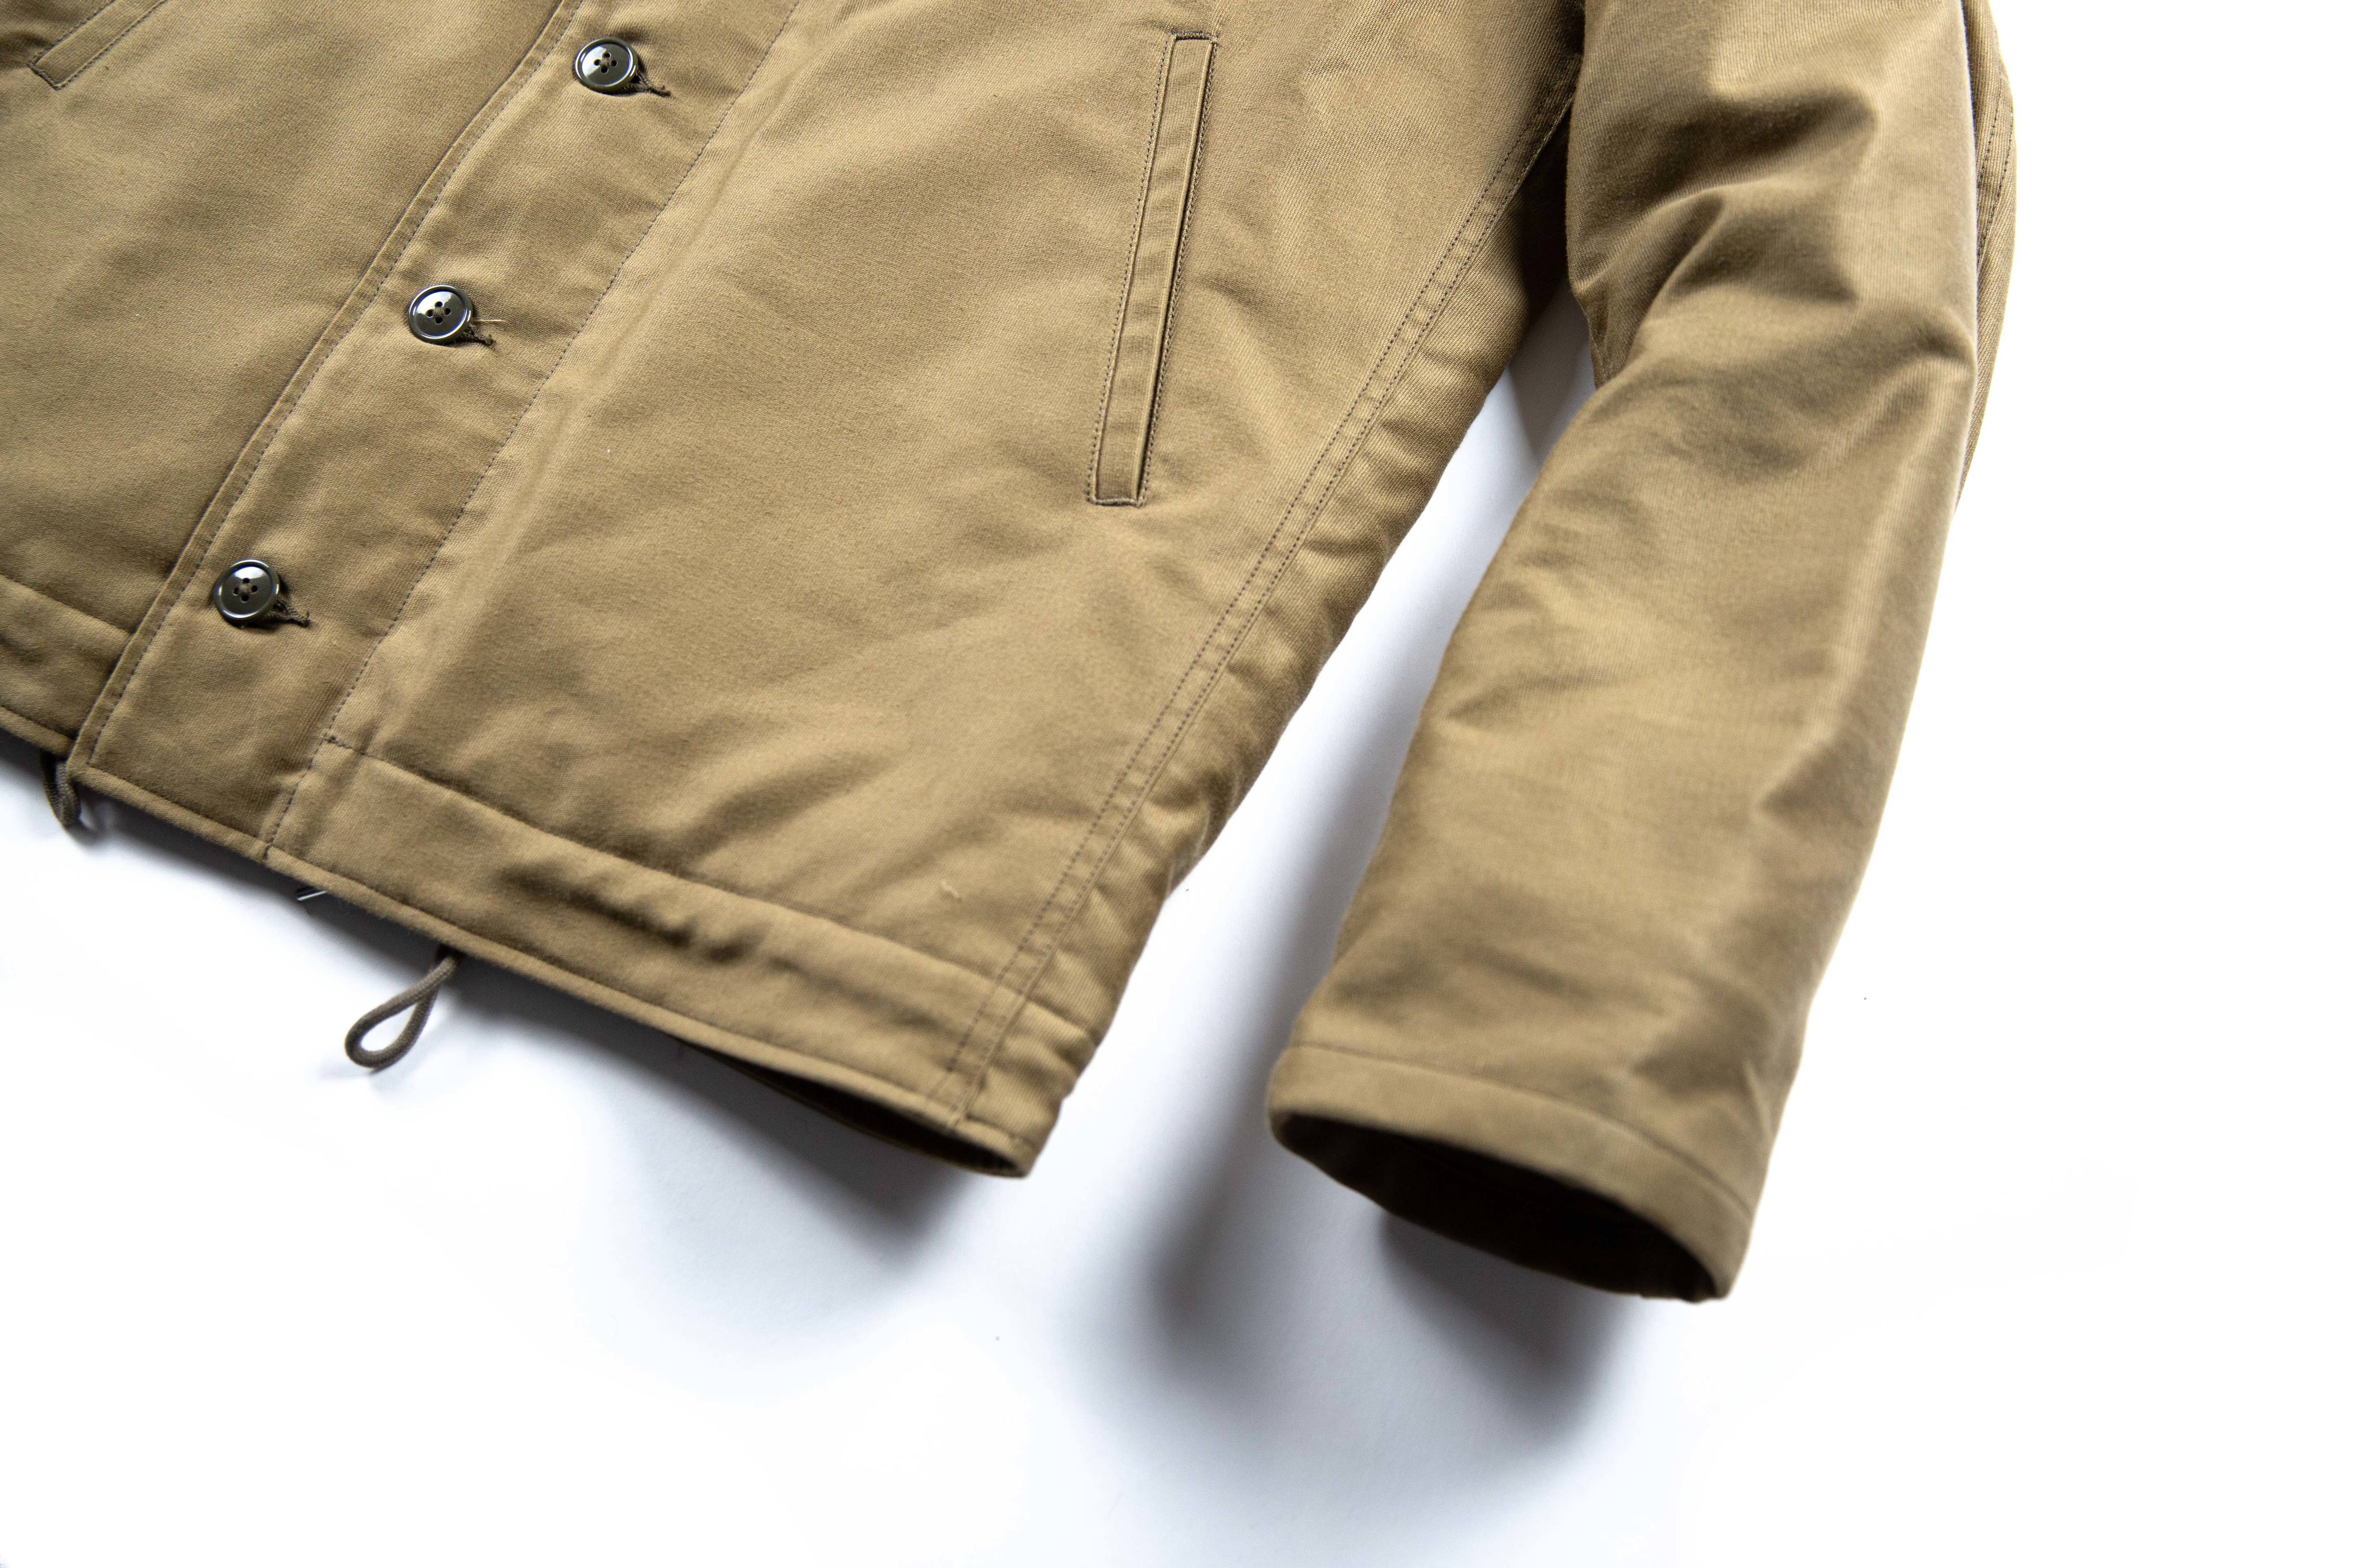 An Ode to The N-1 Deck Jacket